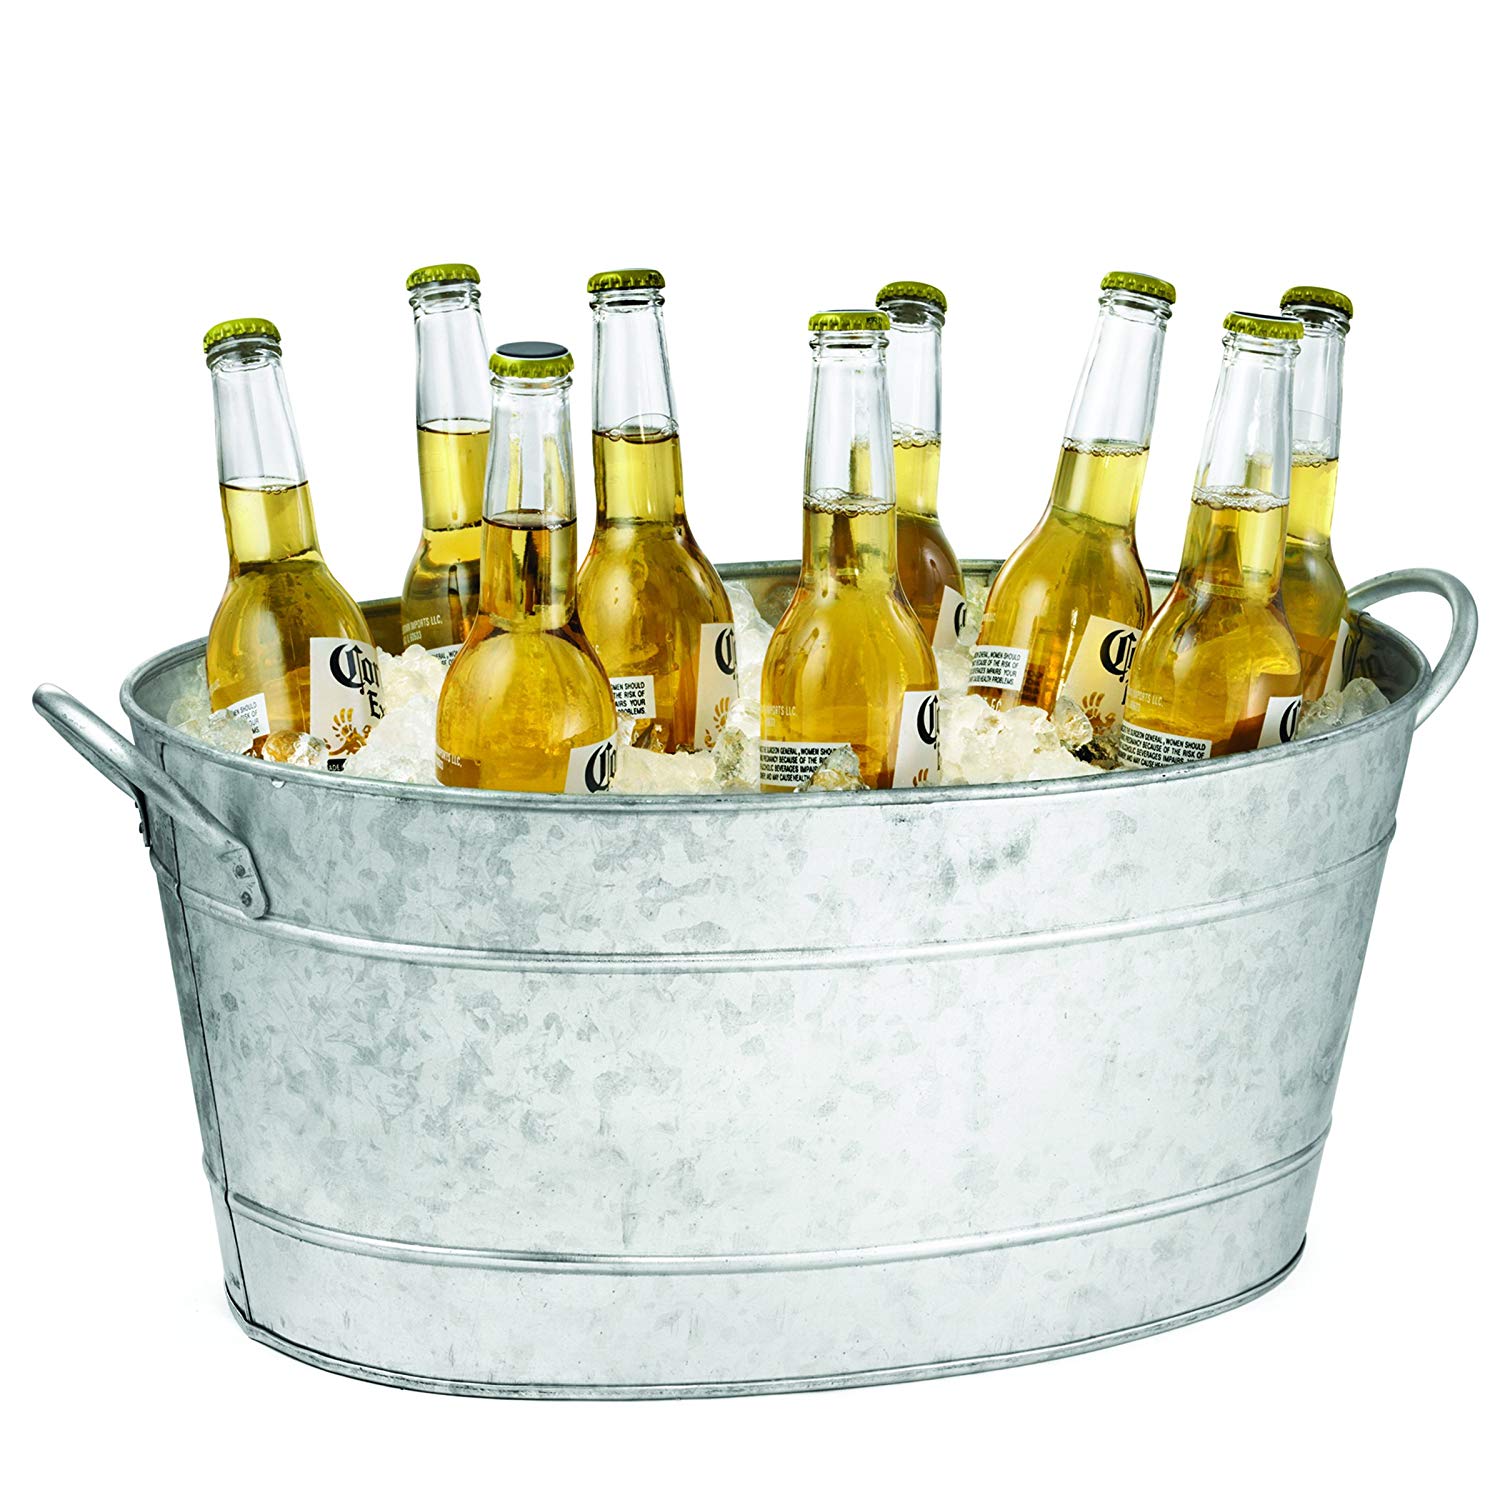  5.5 Gallons Galvanized Oval Beverage Tub